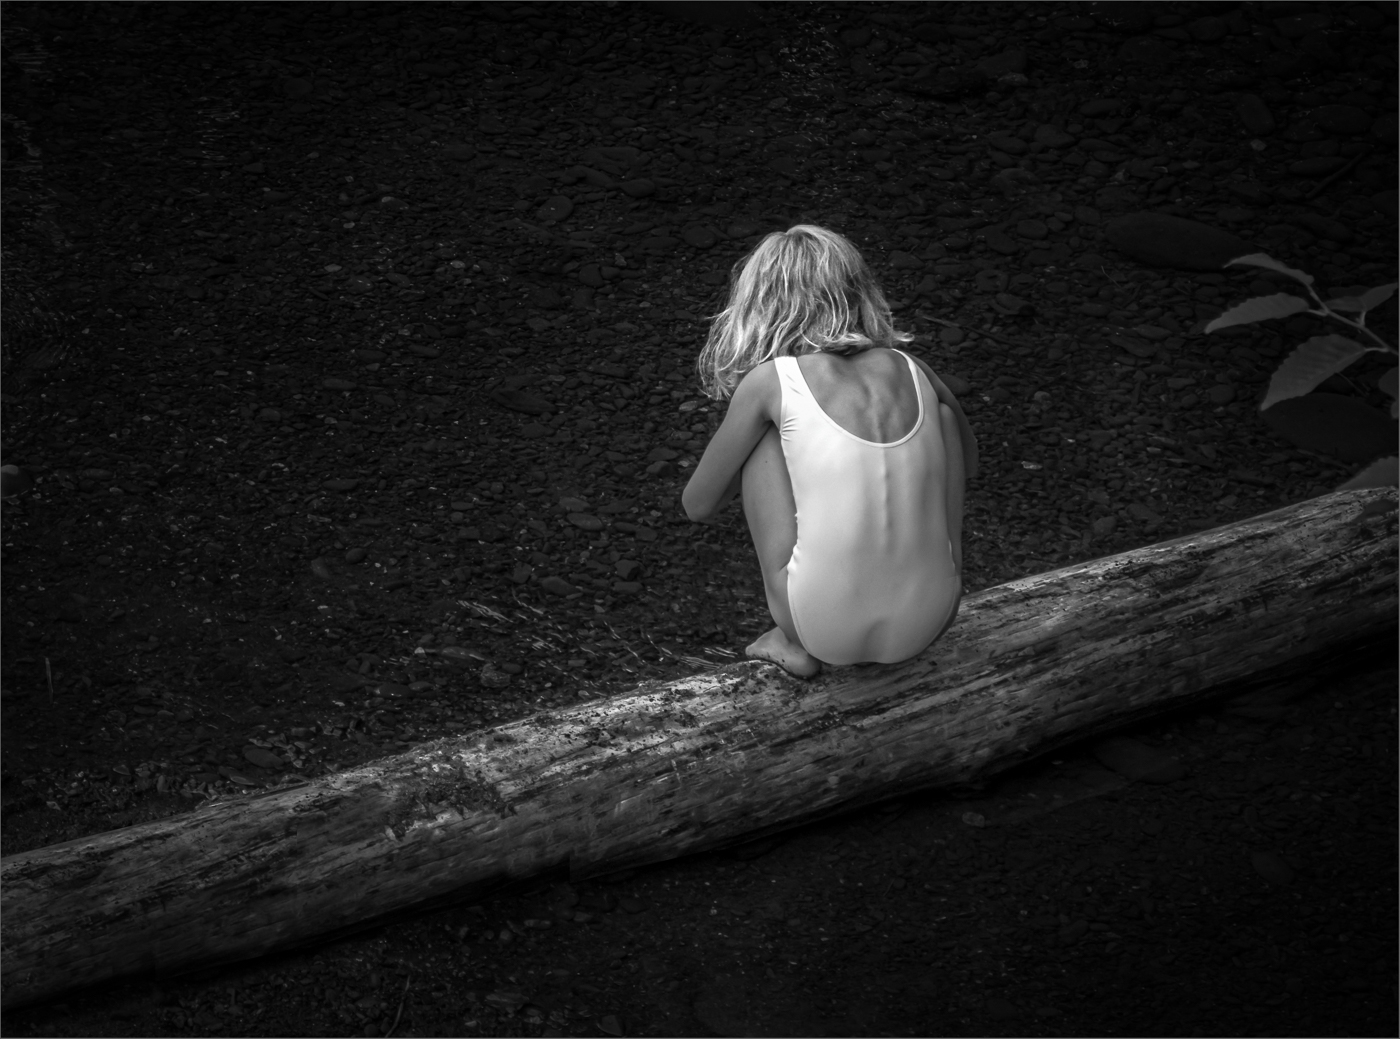 Girl on a Log by Witta Priester